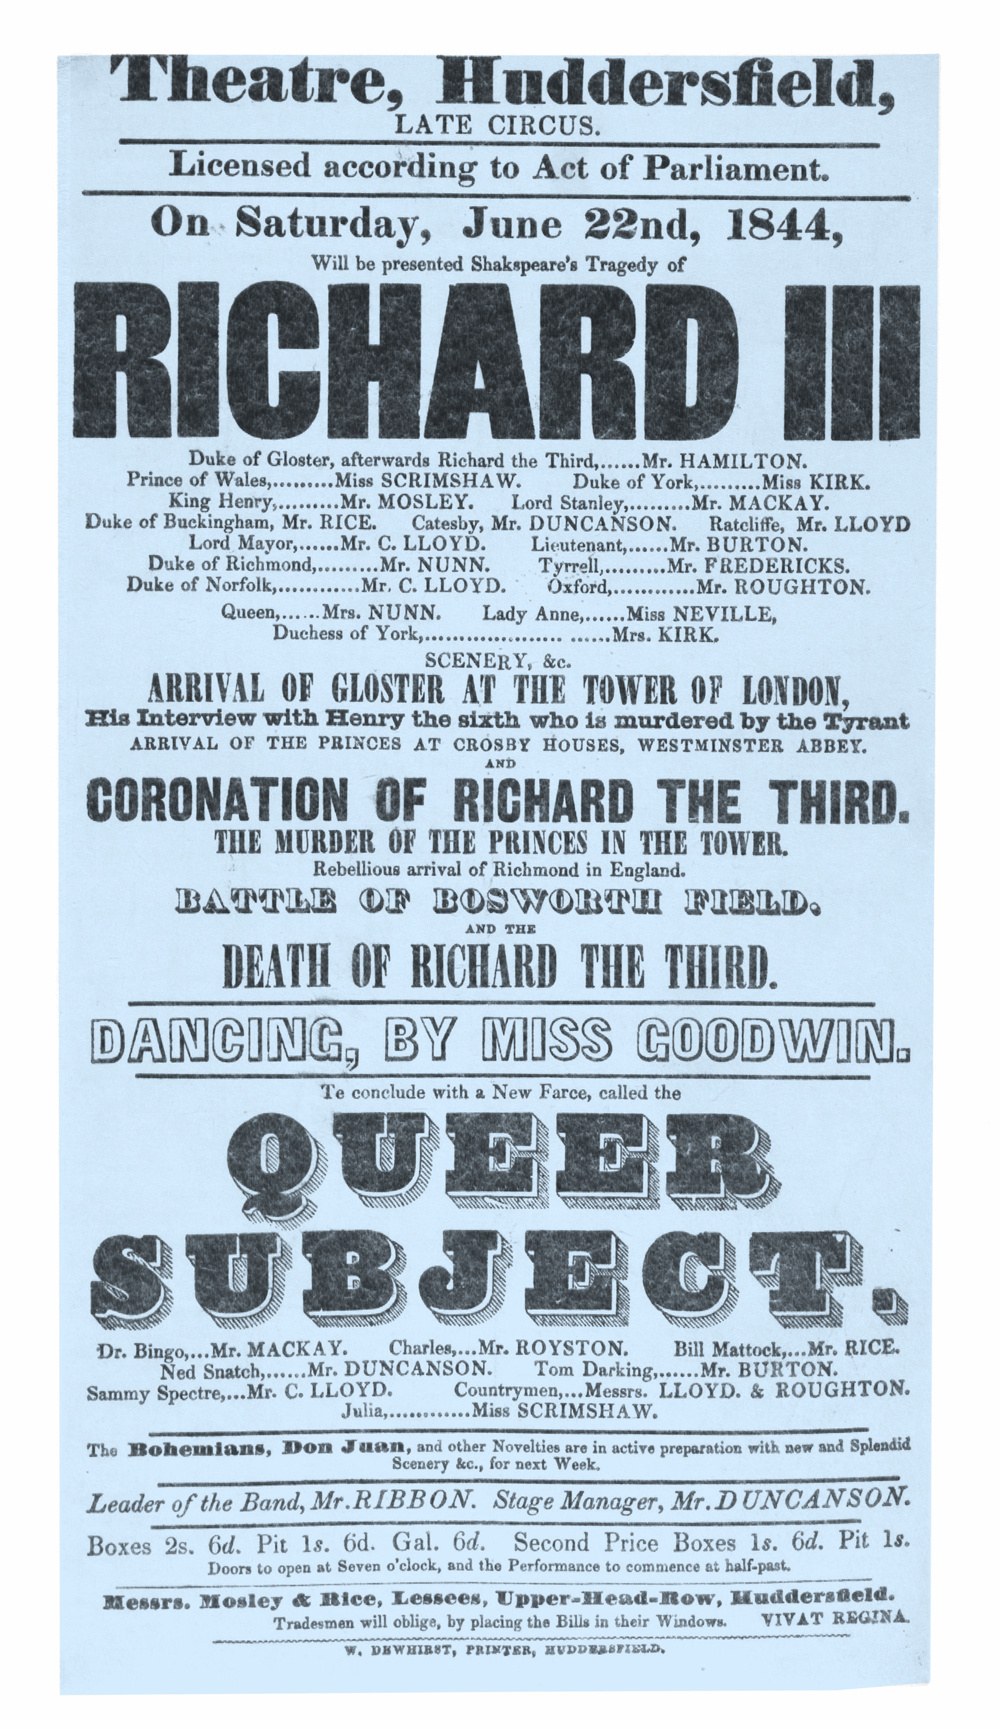 A playbill from July 1844. Main listings are for Richard III and Queer Subject.